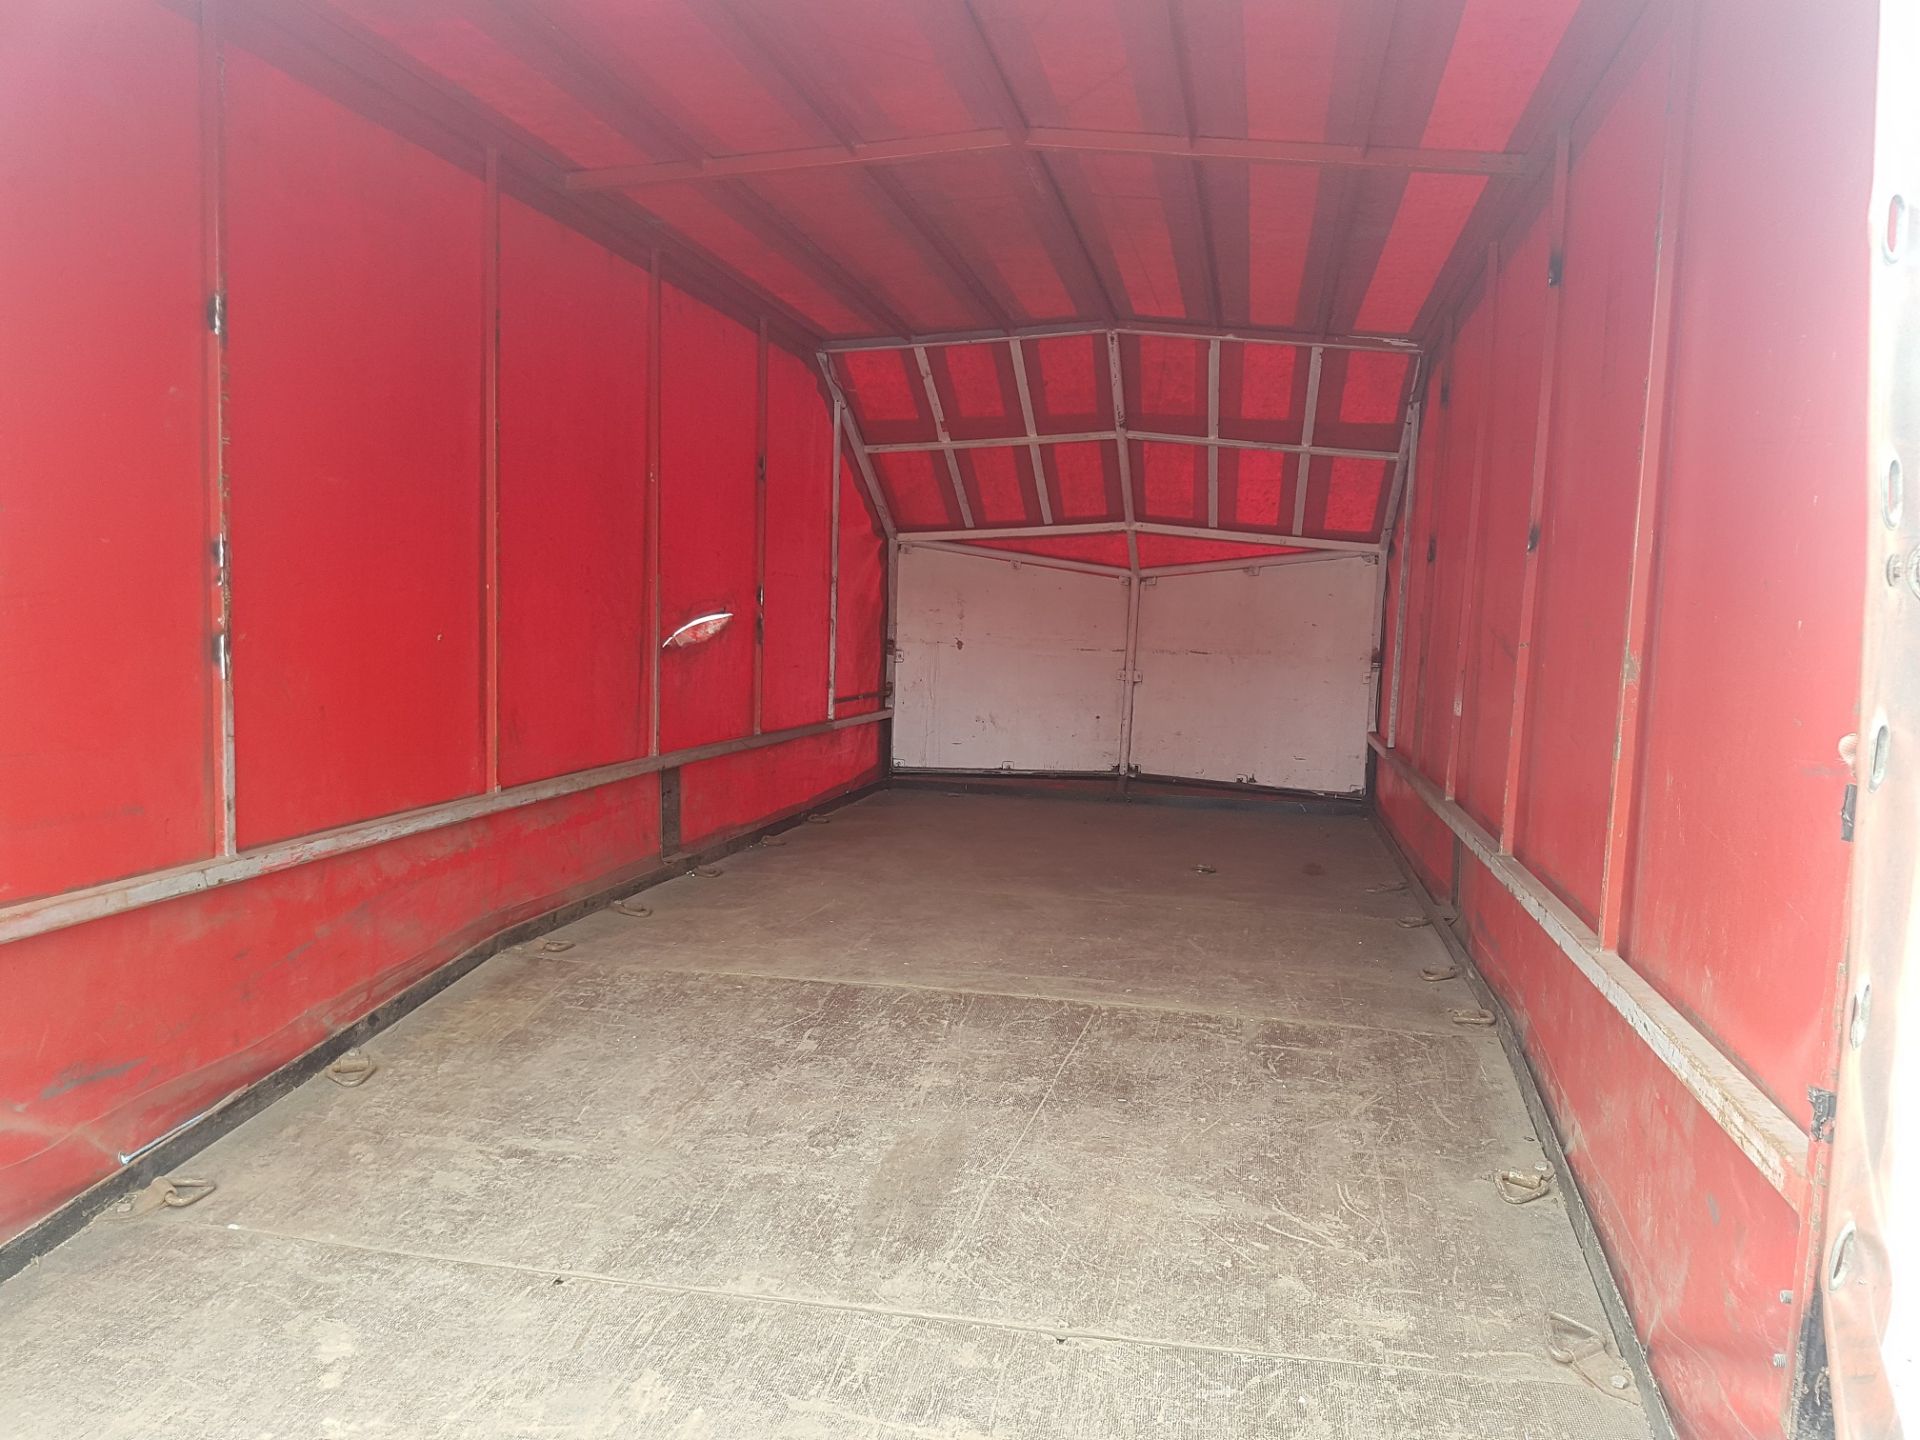 TRI-AXLE BEAVER-TAIL CAR TRANSPORTER COVERED TRAILER - 5.5 METRE BED LENGTH!  *PLUS VAT*   CAN FIT A - Image 11 of 14